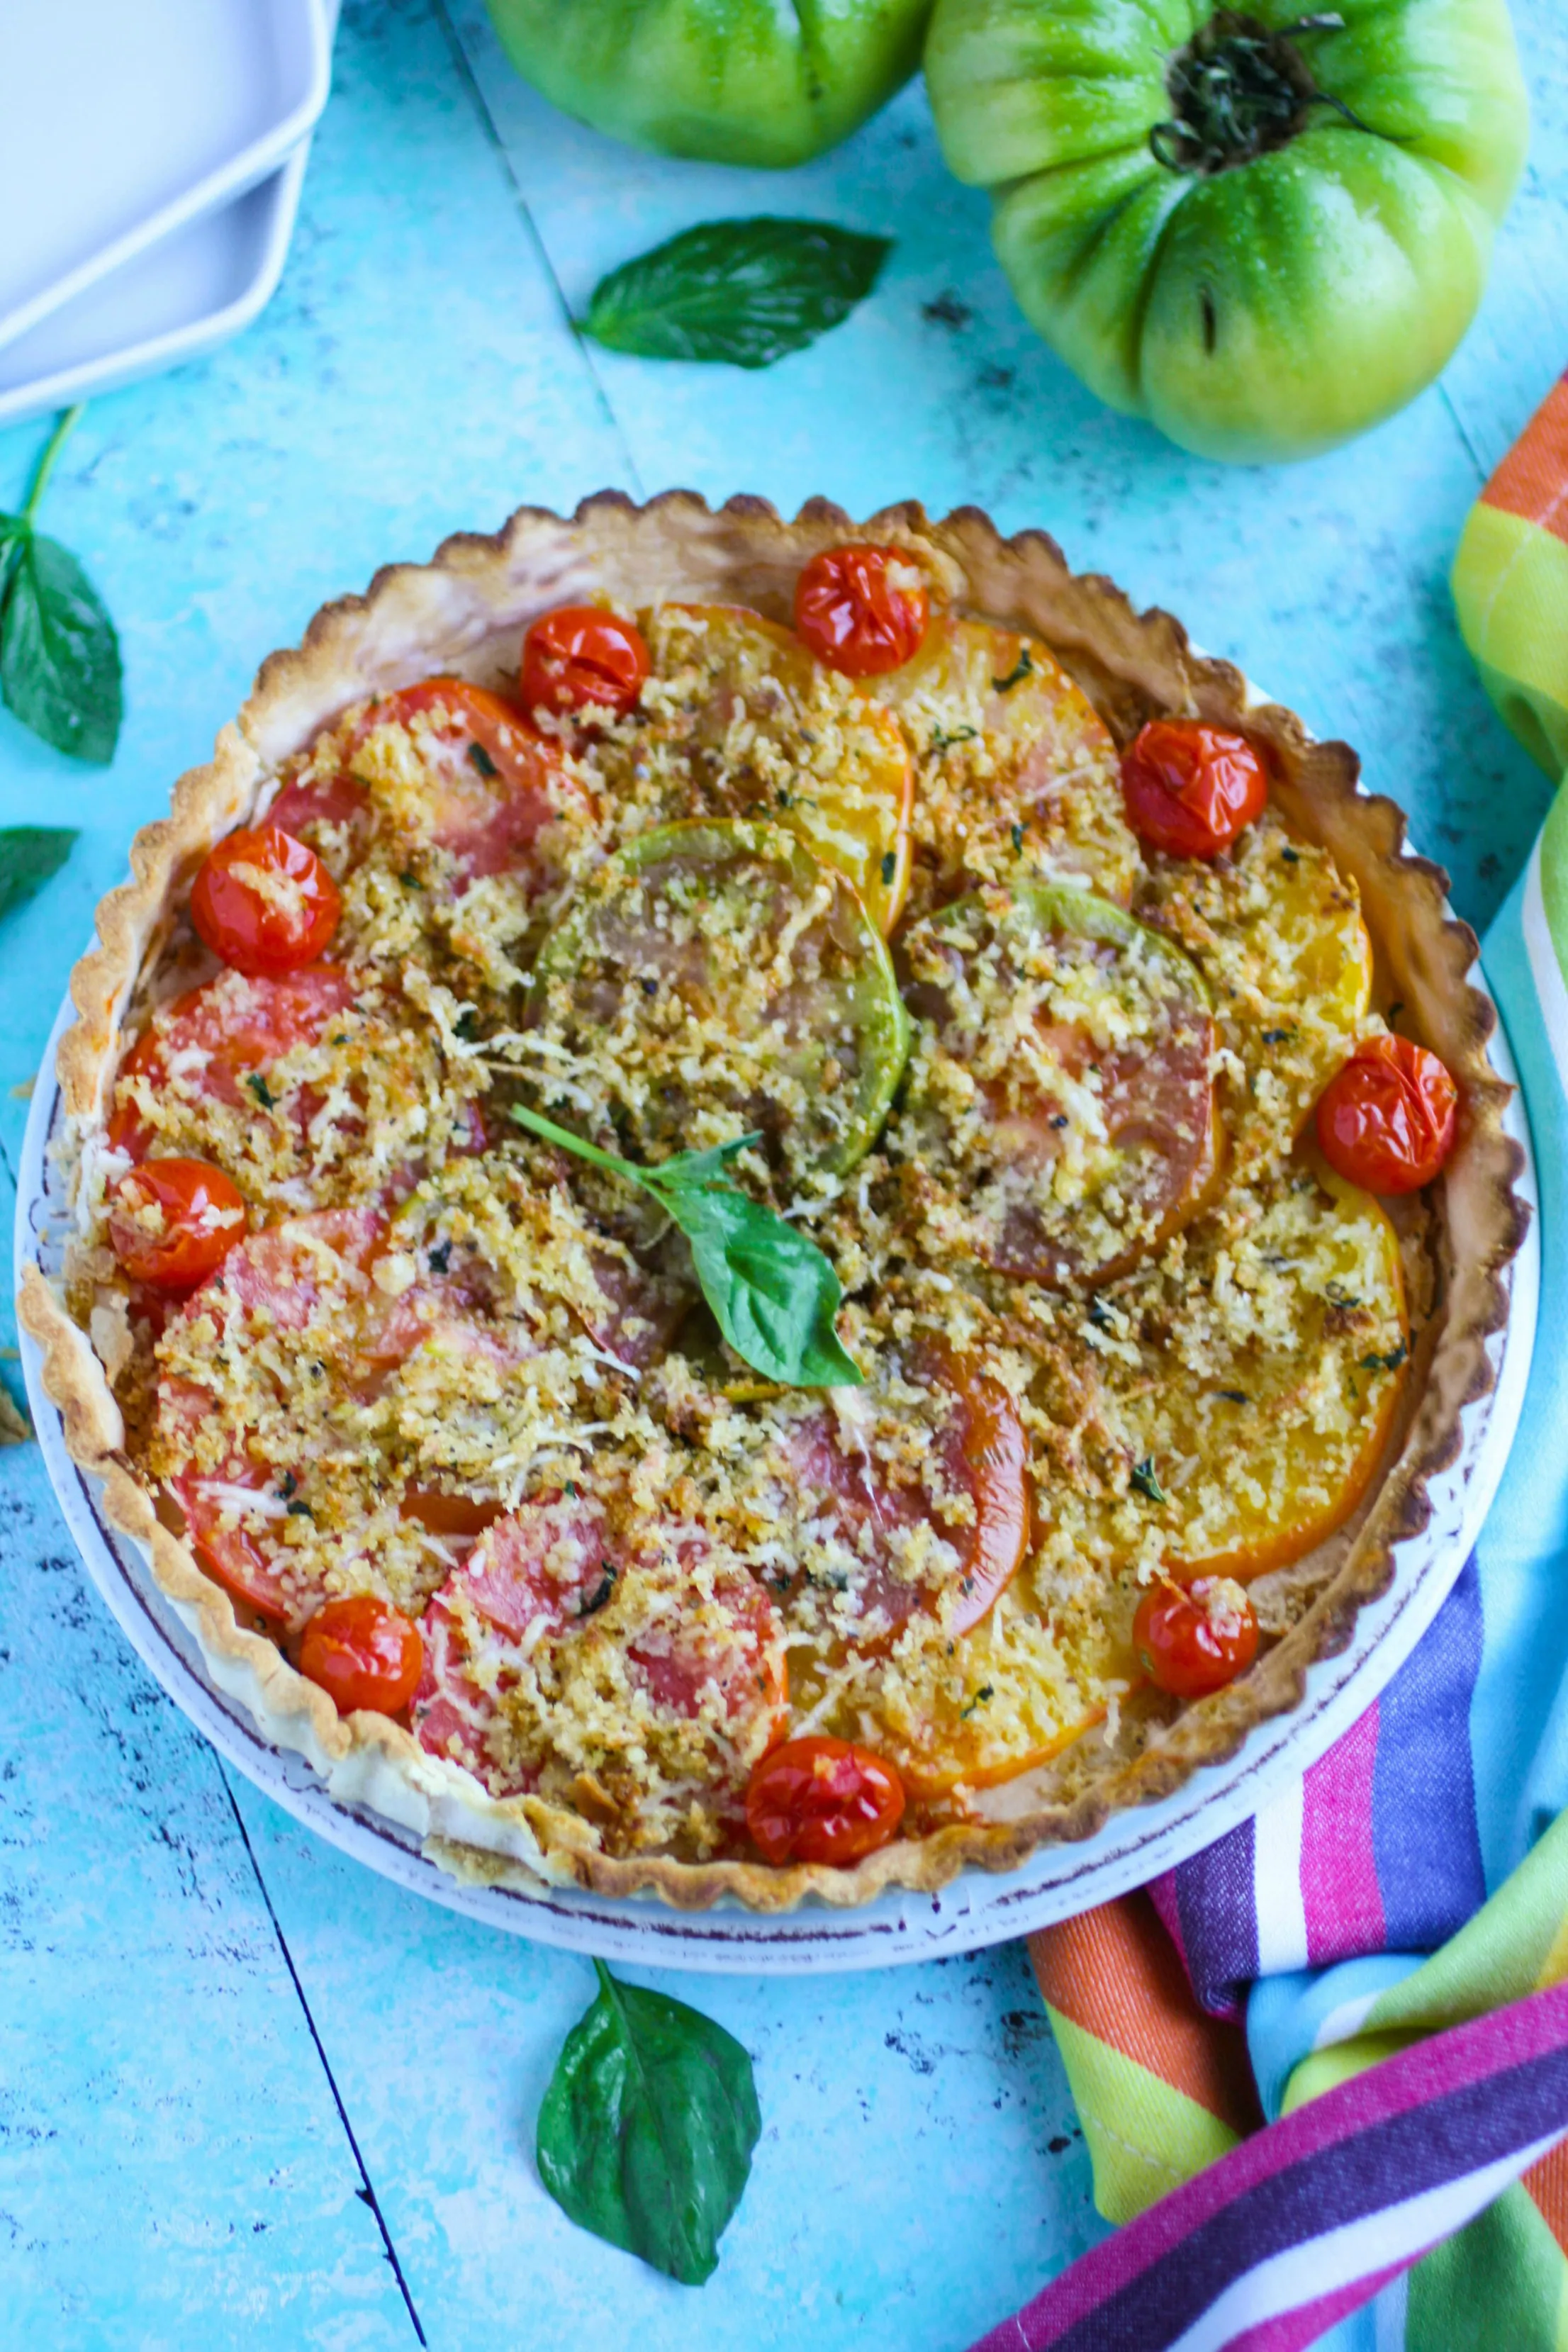 Tomato Tart with Cheesy Breadcrumbs is a perfect appetizer to serve to send off summer. If you don't get a chance to make it now, save this recipe for next year.